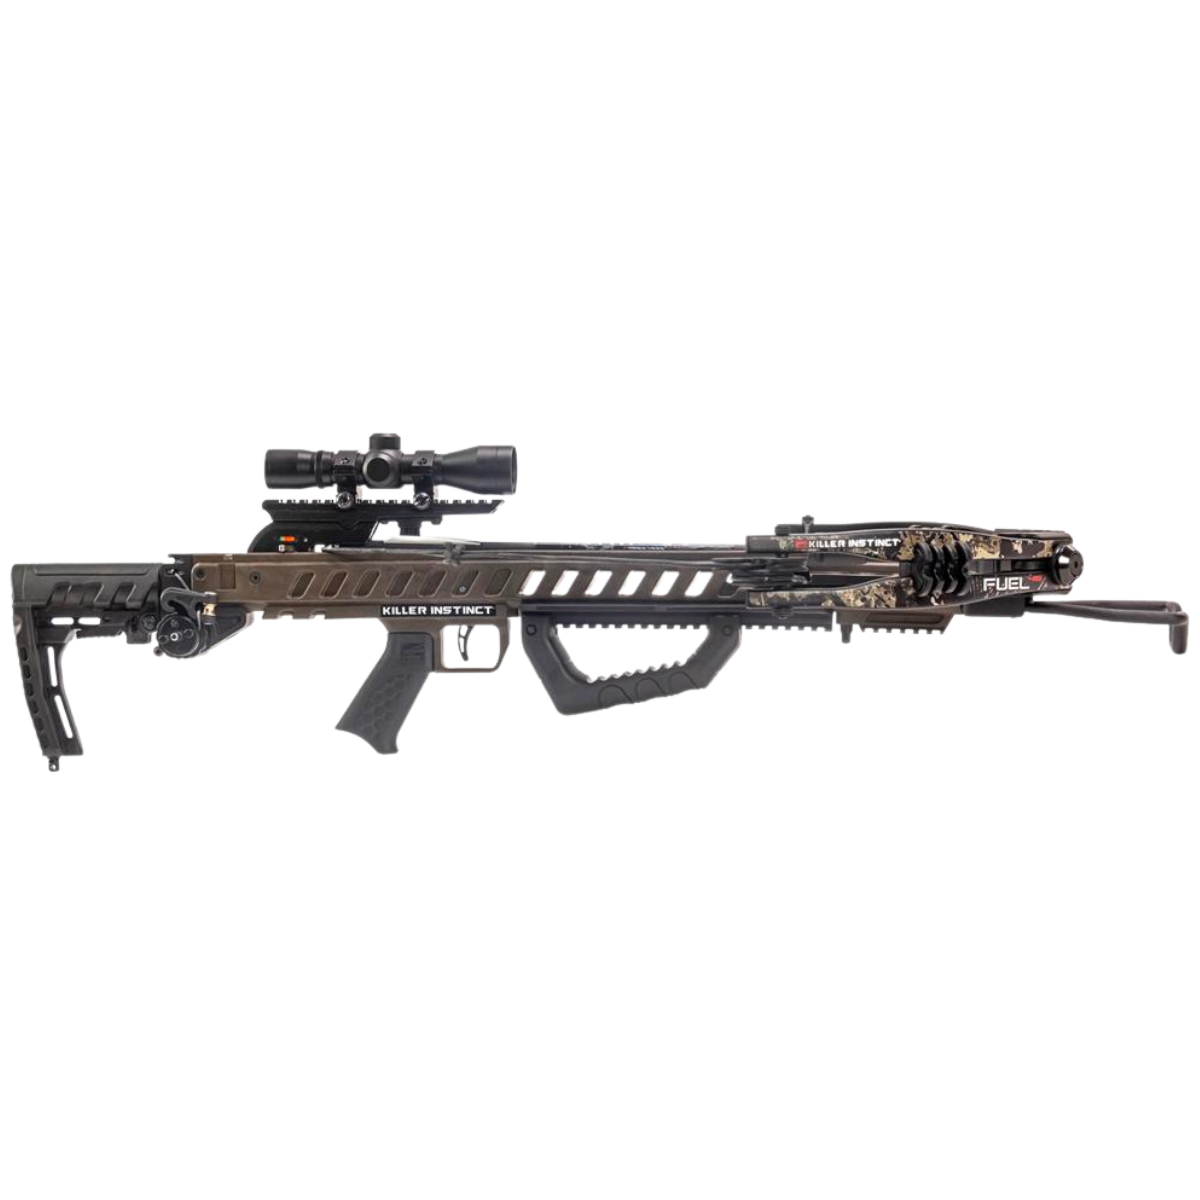 Killer Instinct Fuel 415fps Compound Crossbow Camo - Fast UK Shipping | Tactical Archery UK